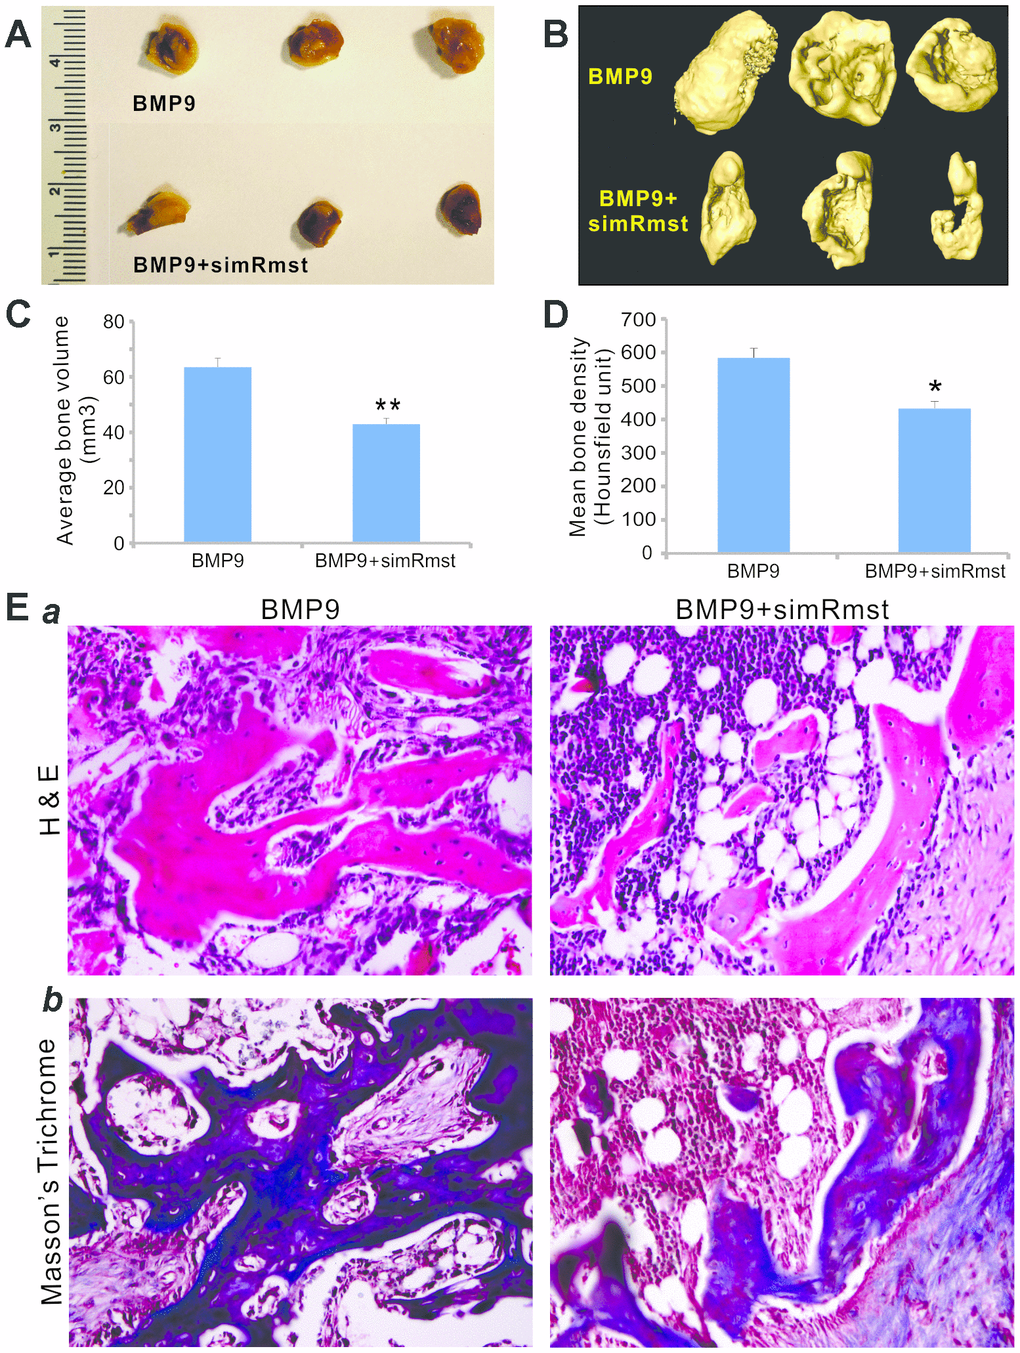 Silencing Rmst expression attenuates BMP9-induced ectopic bone formation. Subconfluent iMADs were infected with Ad-BMP9, Ad-GFP, and/or AdR-simRmst for 30h and collected for subcutaneous injection into the flanks of athymic nude mice. At 4 weeks after implantation, the mice were sacrificed and ectopic bone masses were retrieved. Representative macrographic images (A) and micro-CT isosurface images (B) are shown. No retrievable masses were found in the Ad-GFP or AdR-simRsmt alone group. The average bone volume (C) and mean bone density (D) were determined by analyzing micro-CT data using the Amira program. “*” pvs. Ad-BMP9+AdR-simRmst group. (E) Histologic evaluation and trichrome staining. The retrieved masses were processed and subjected to hematoxylin and eosin staining (a) and Masson’s trichrome staining (b). Representative images are shown.